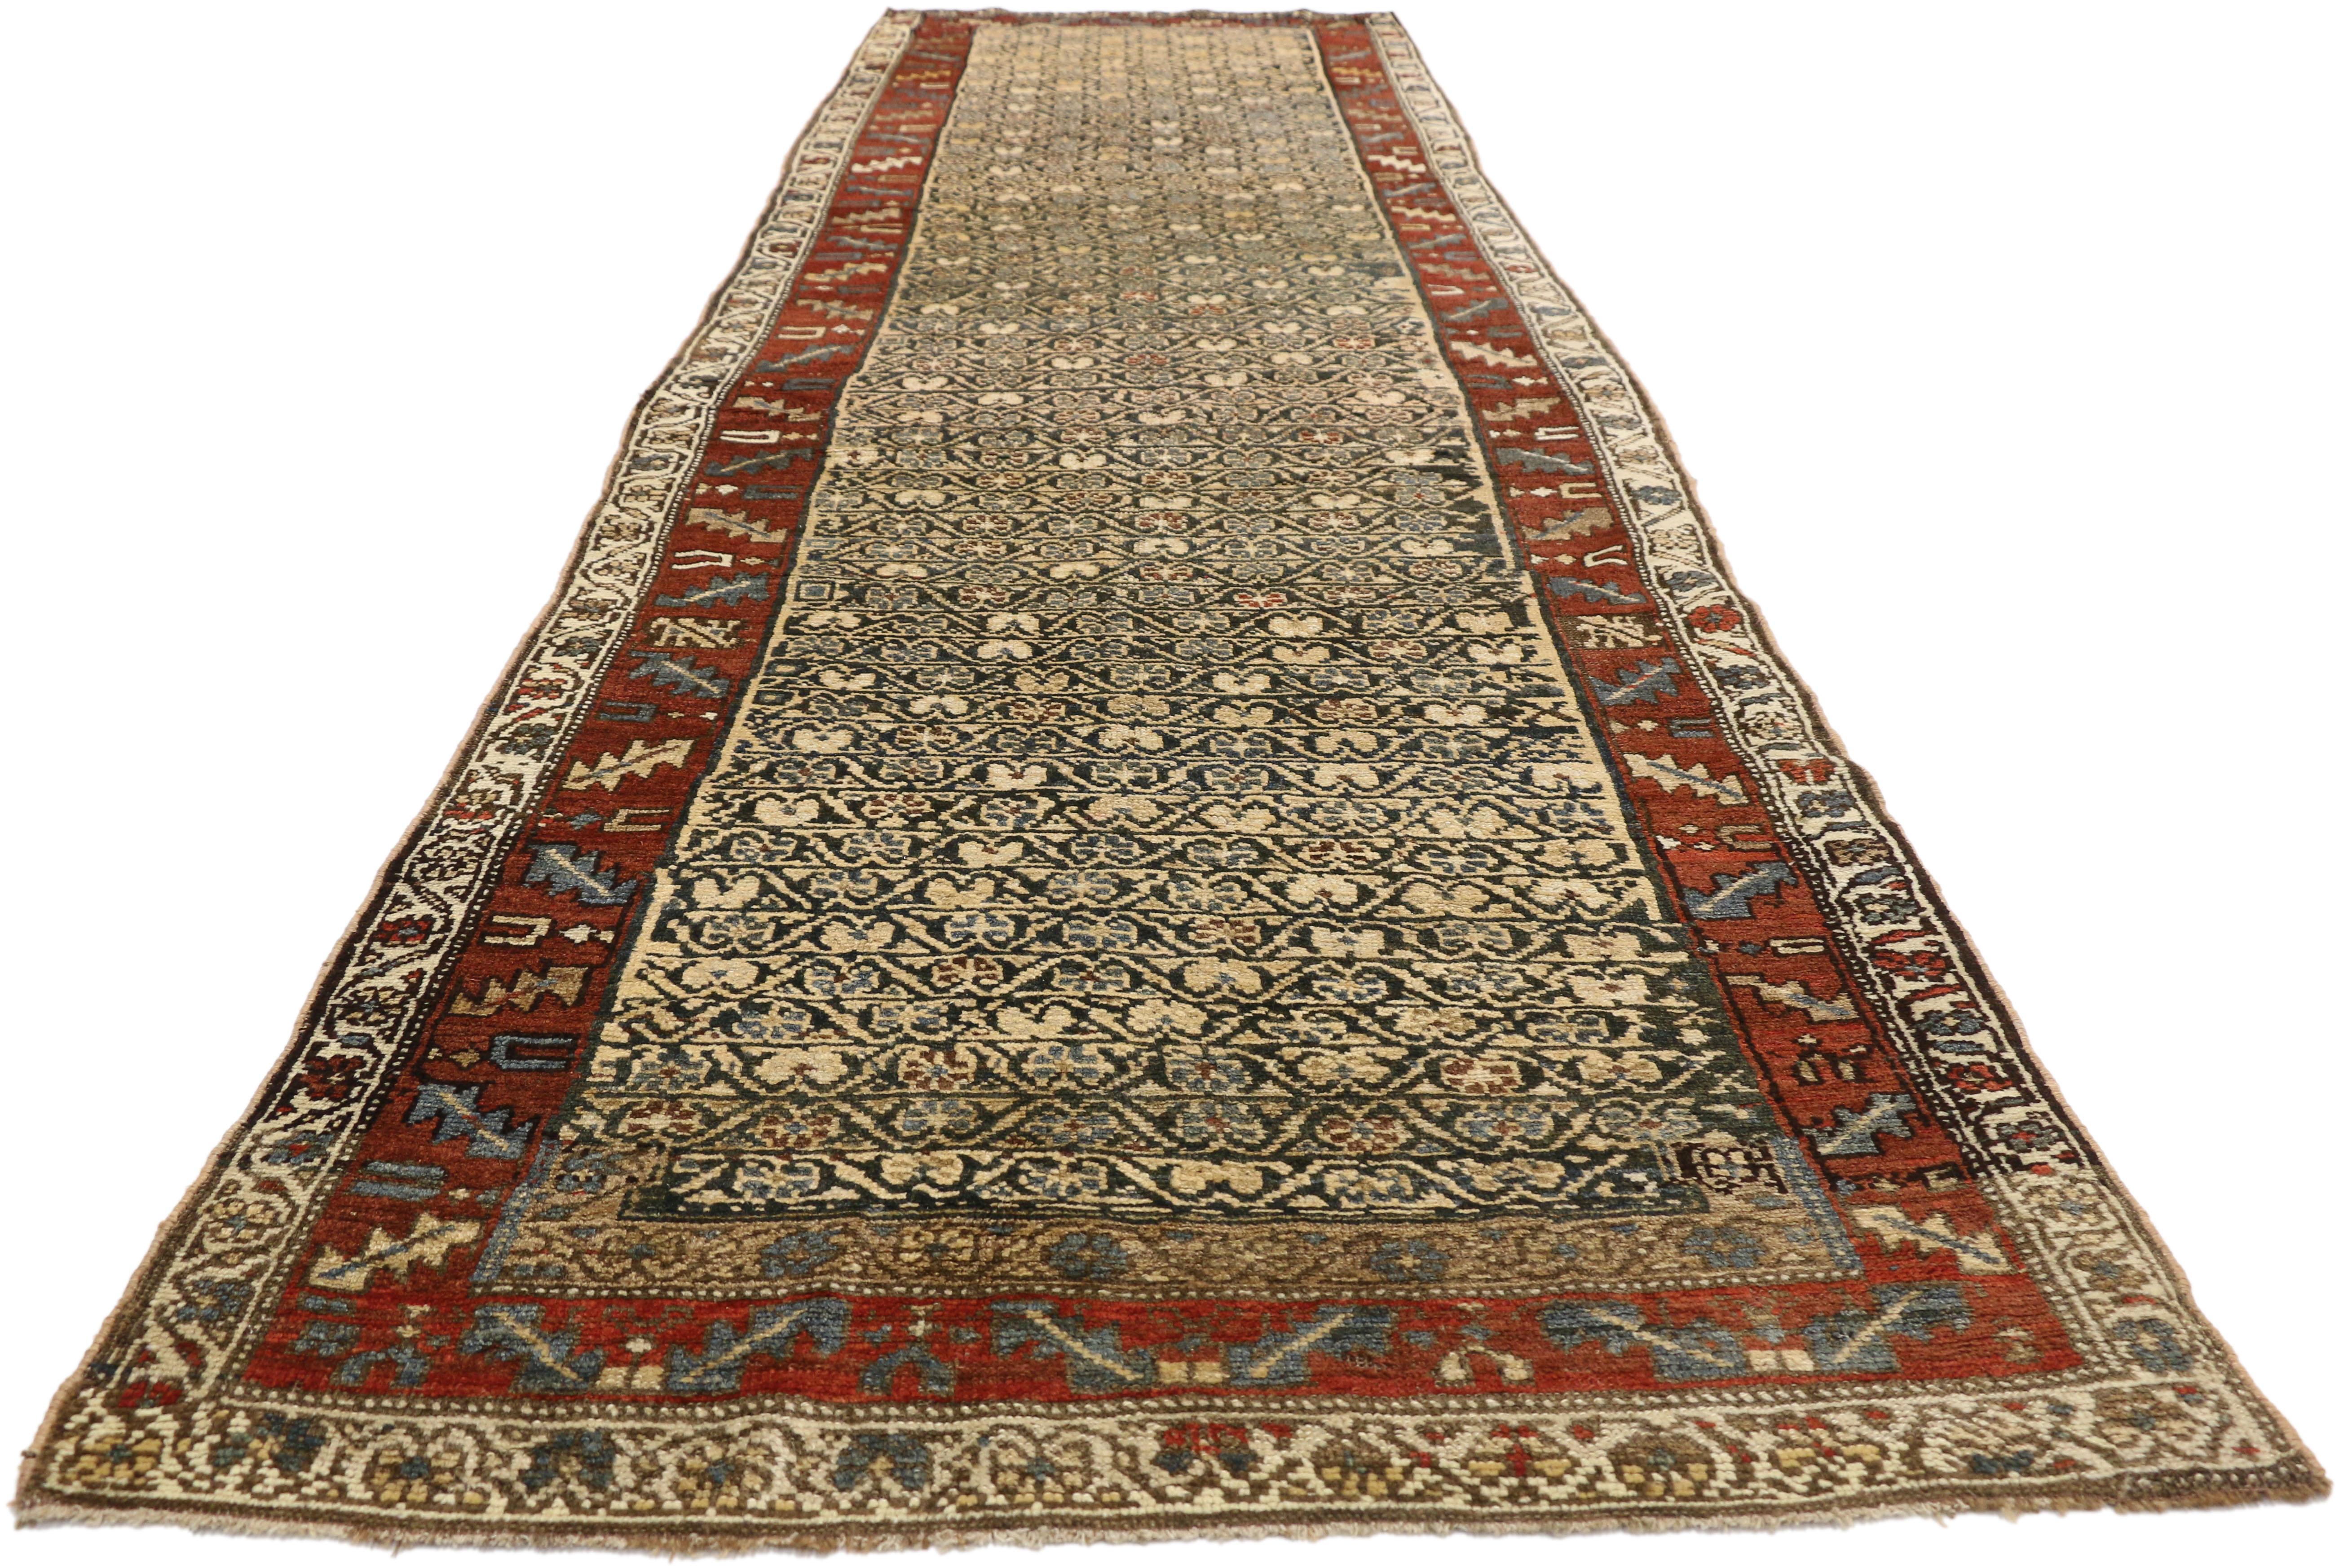 Malayer Antique Persian Kurdish Hallway Runner with Artisan Arts & Crafts Style For Sale